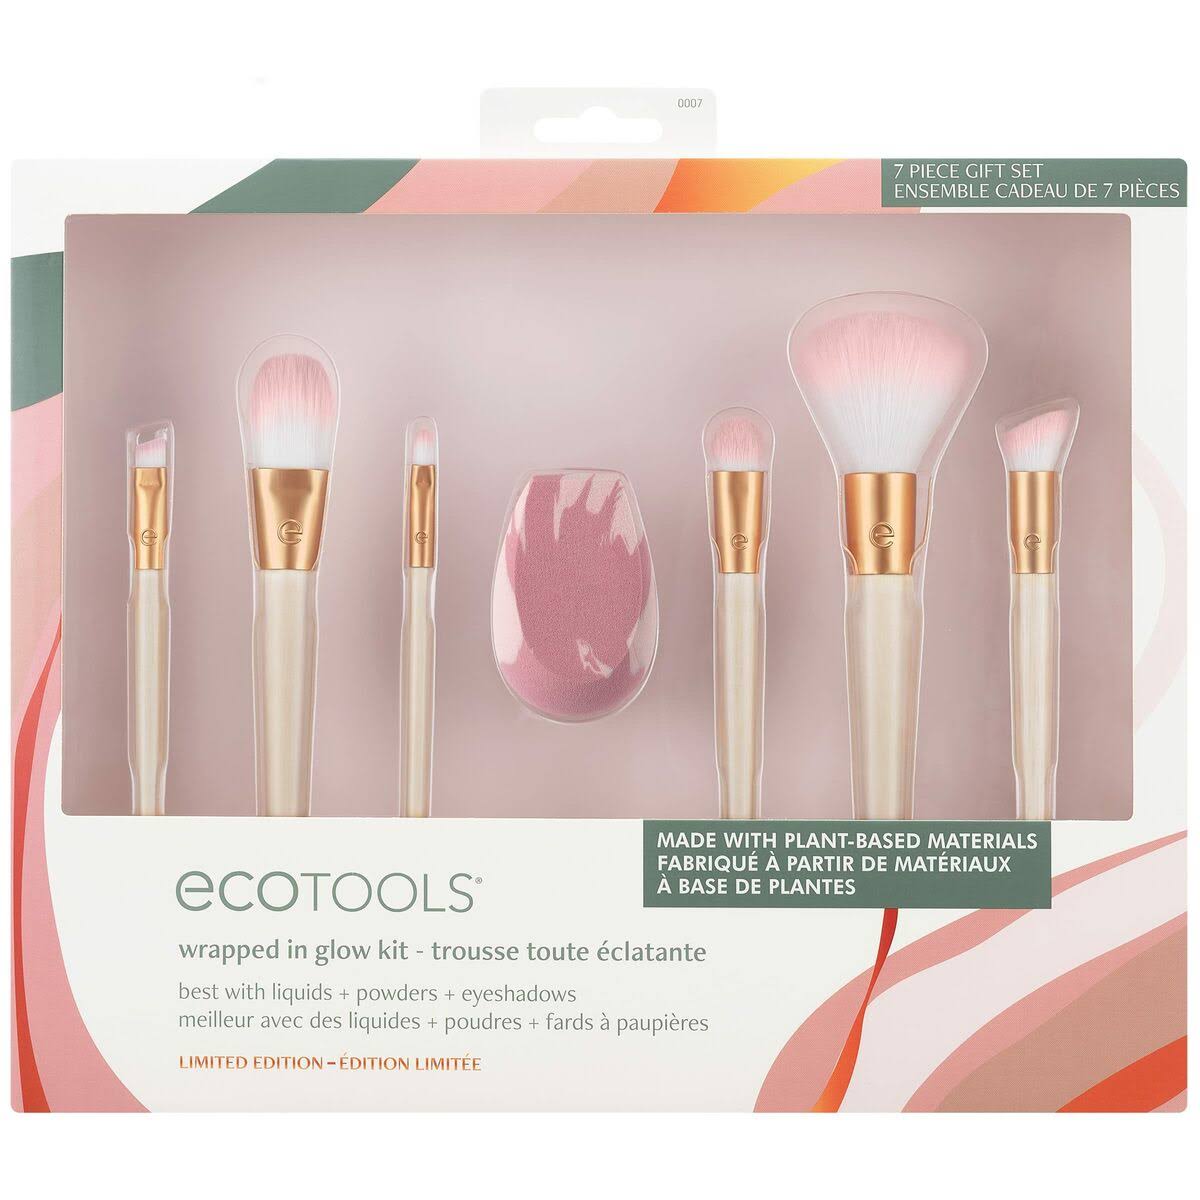 EcoTools, Wrapped in Glow Kit, Limited Edition, 7 Piece Set